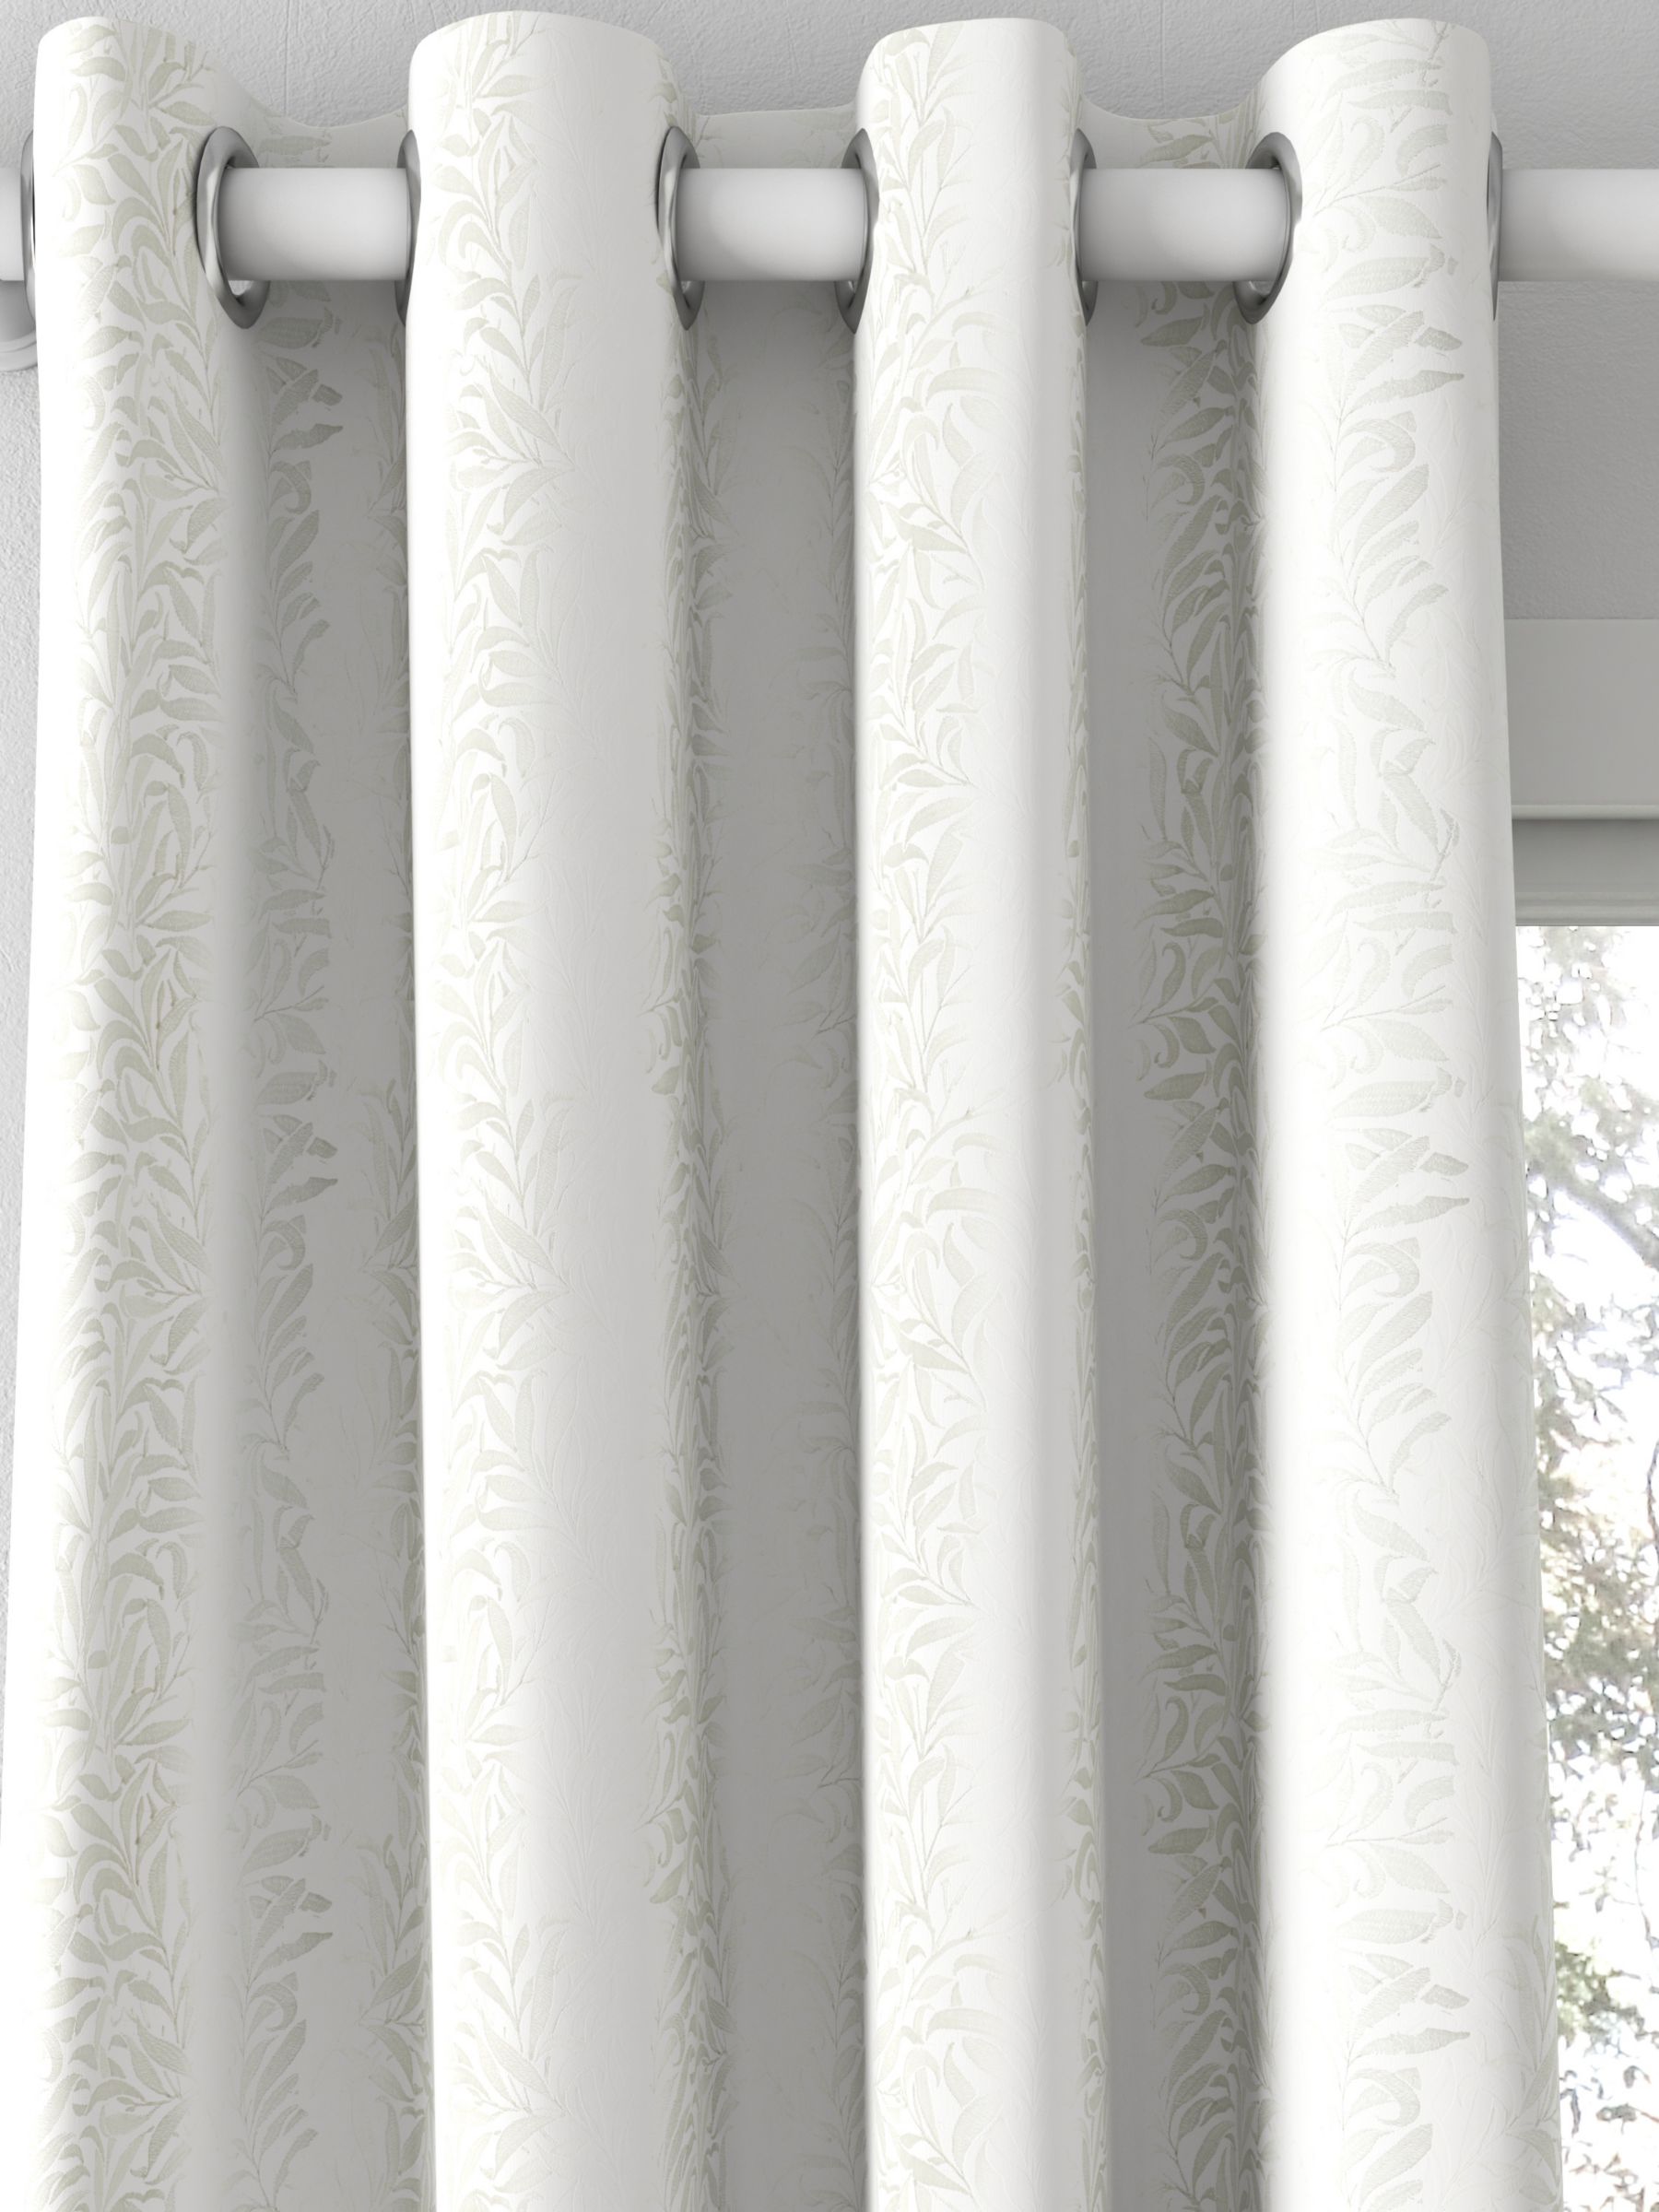 Morris & Co. Pure Willow Boughs Made to Measure Curtains, Paper White